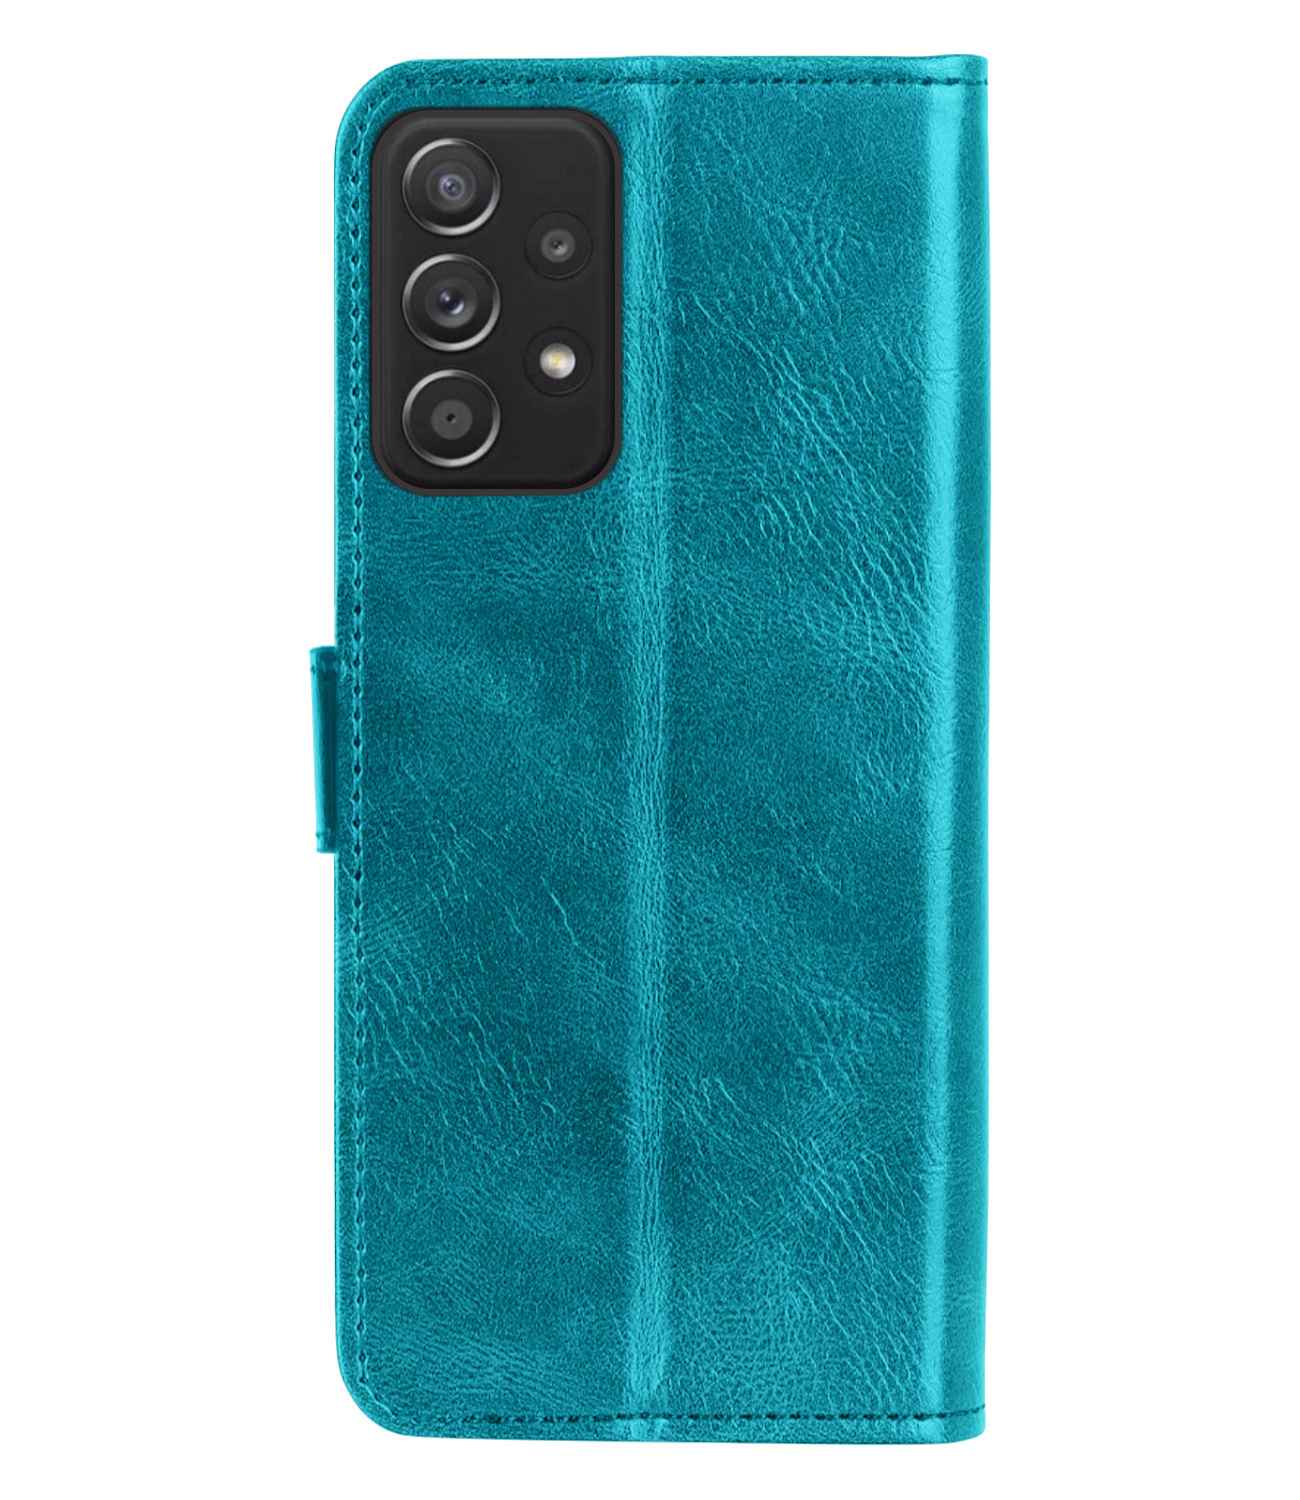 Samsung A23 Hoes Bookcase Flipcase Book Cover Met 2x Screenprotector - Samsung Galaxy A23 Hoesje Book Case - Turquoise